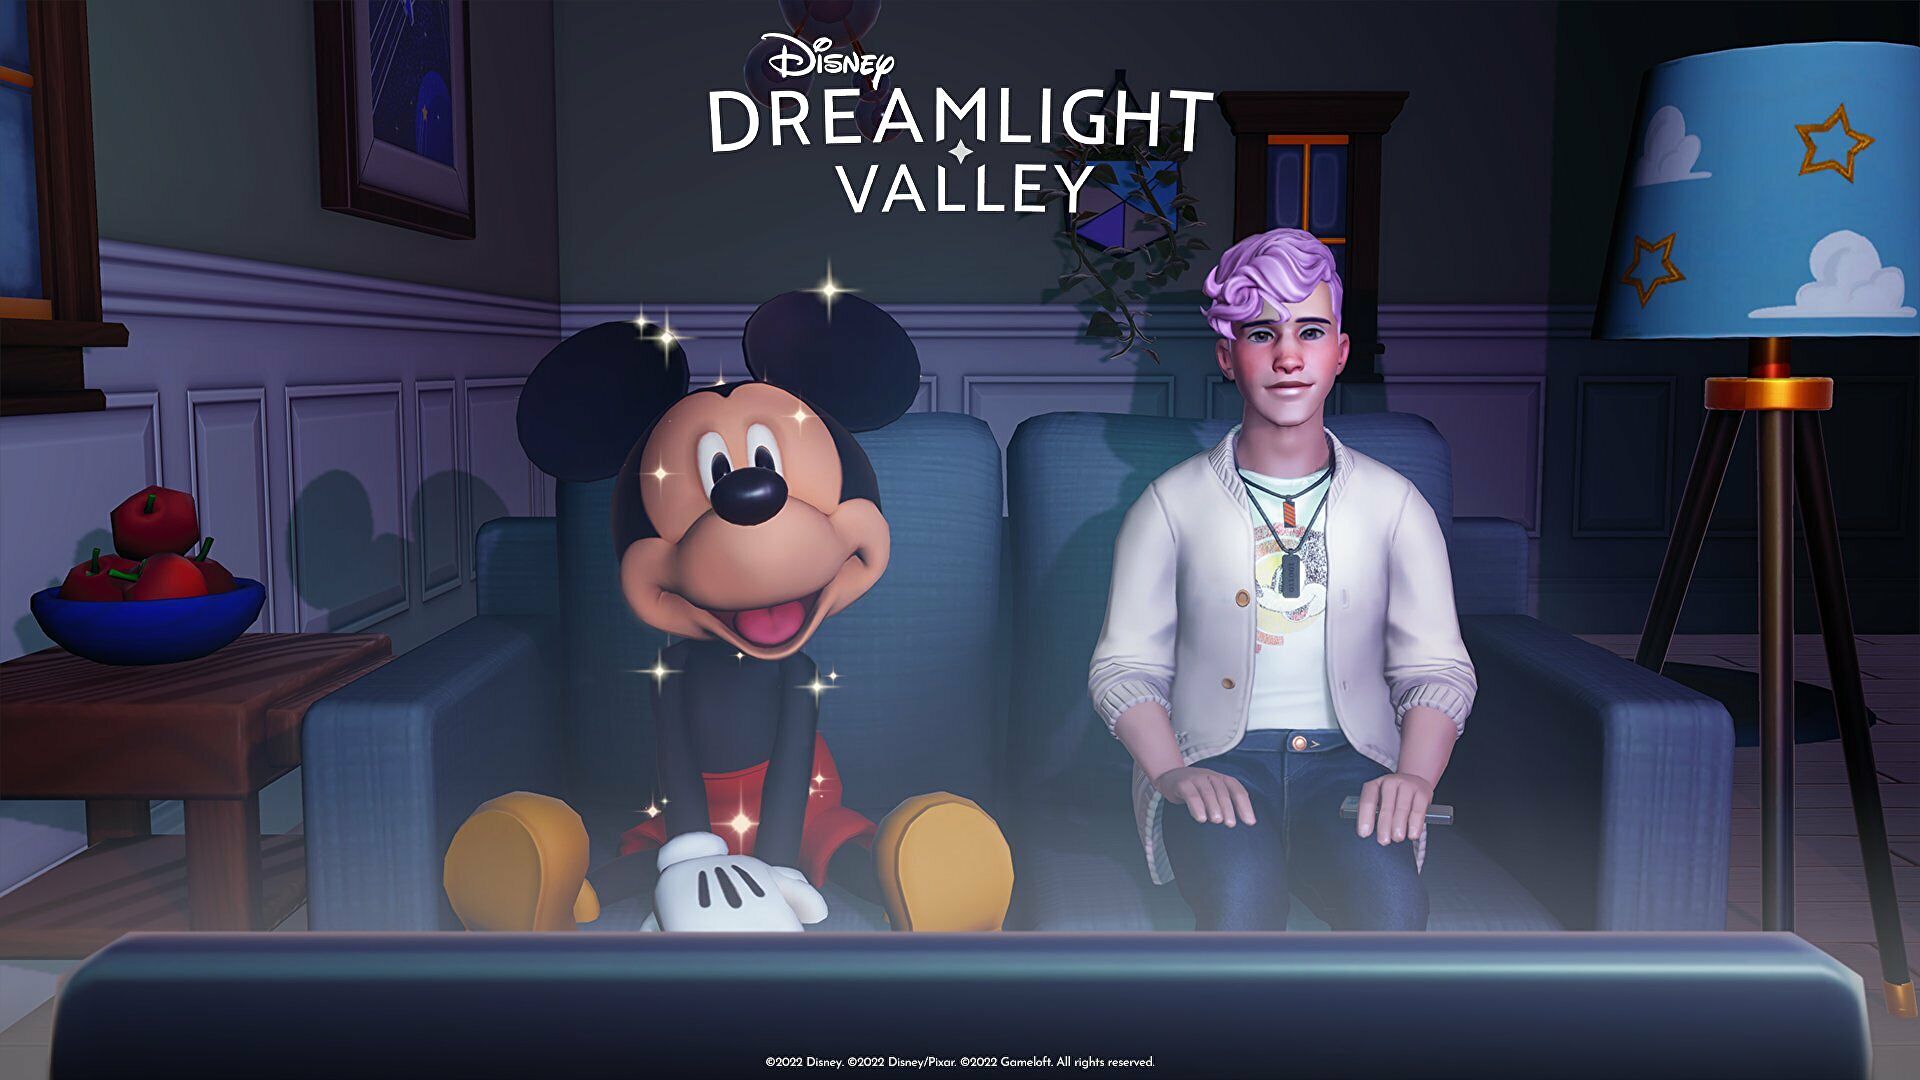 Disney Dreamlight Valley’s next big patch is coming soon, with The Lion King’s Scar being introduced